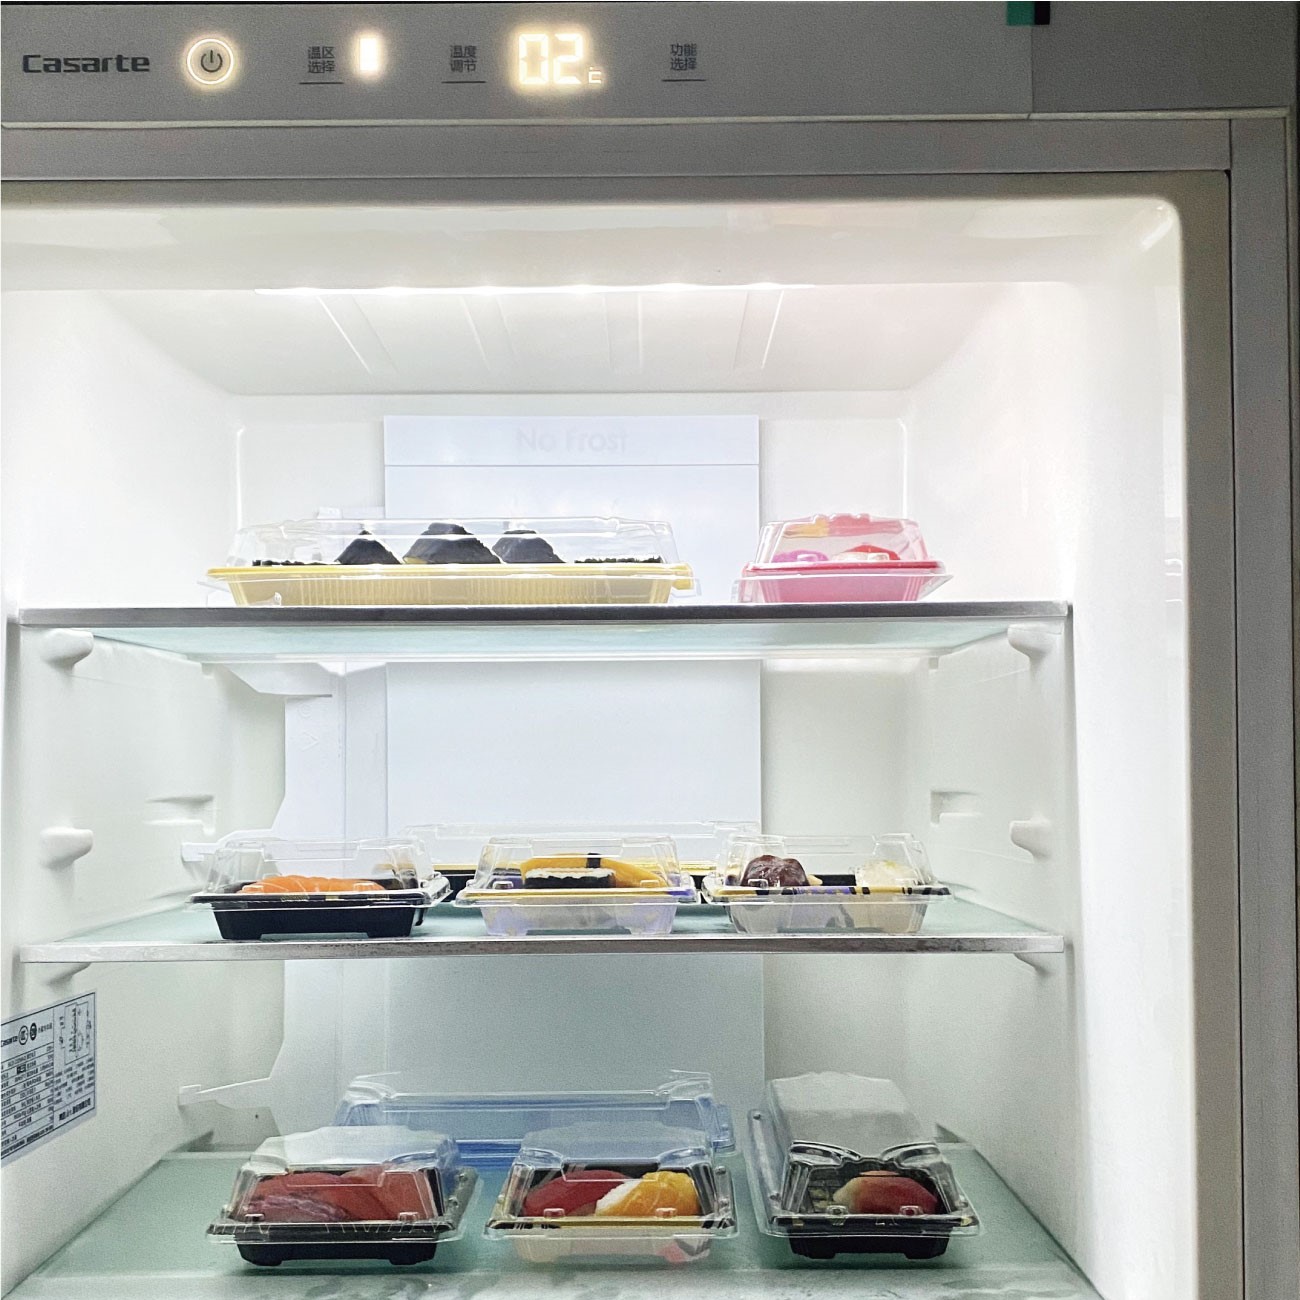 There are some sushi plates WL-07 in the refrigerator, which can be used for refrigeration.